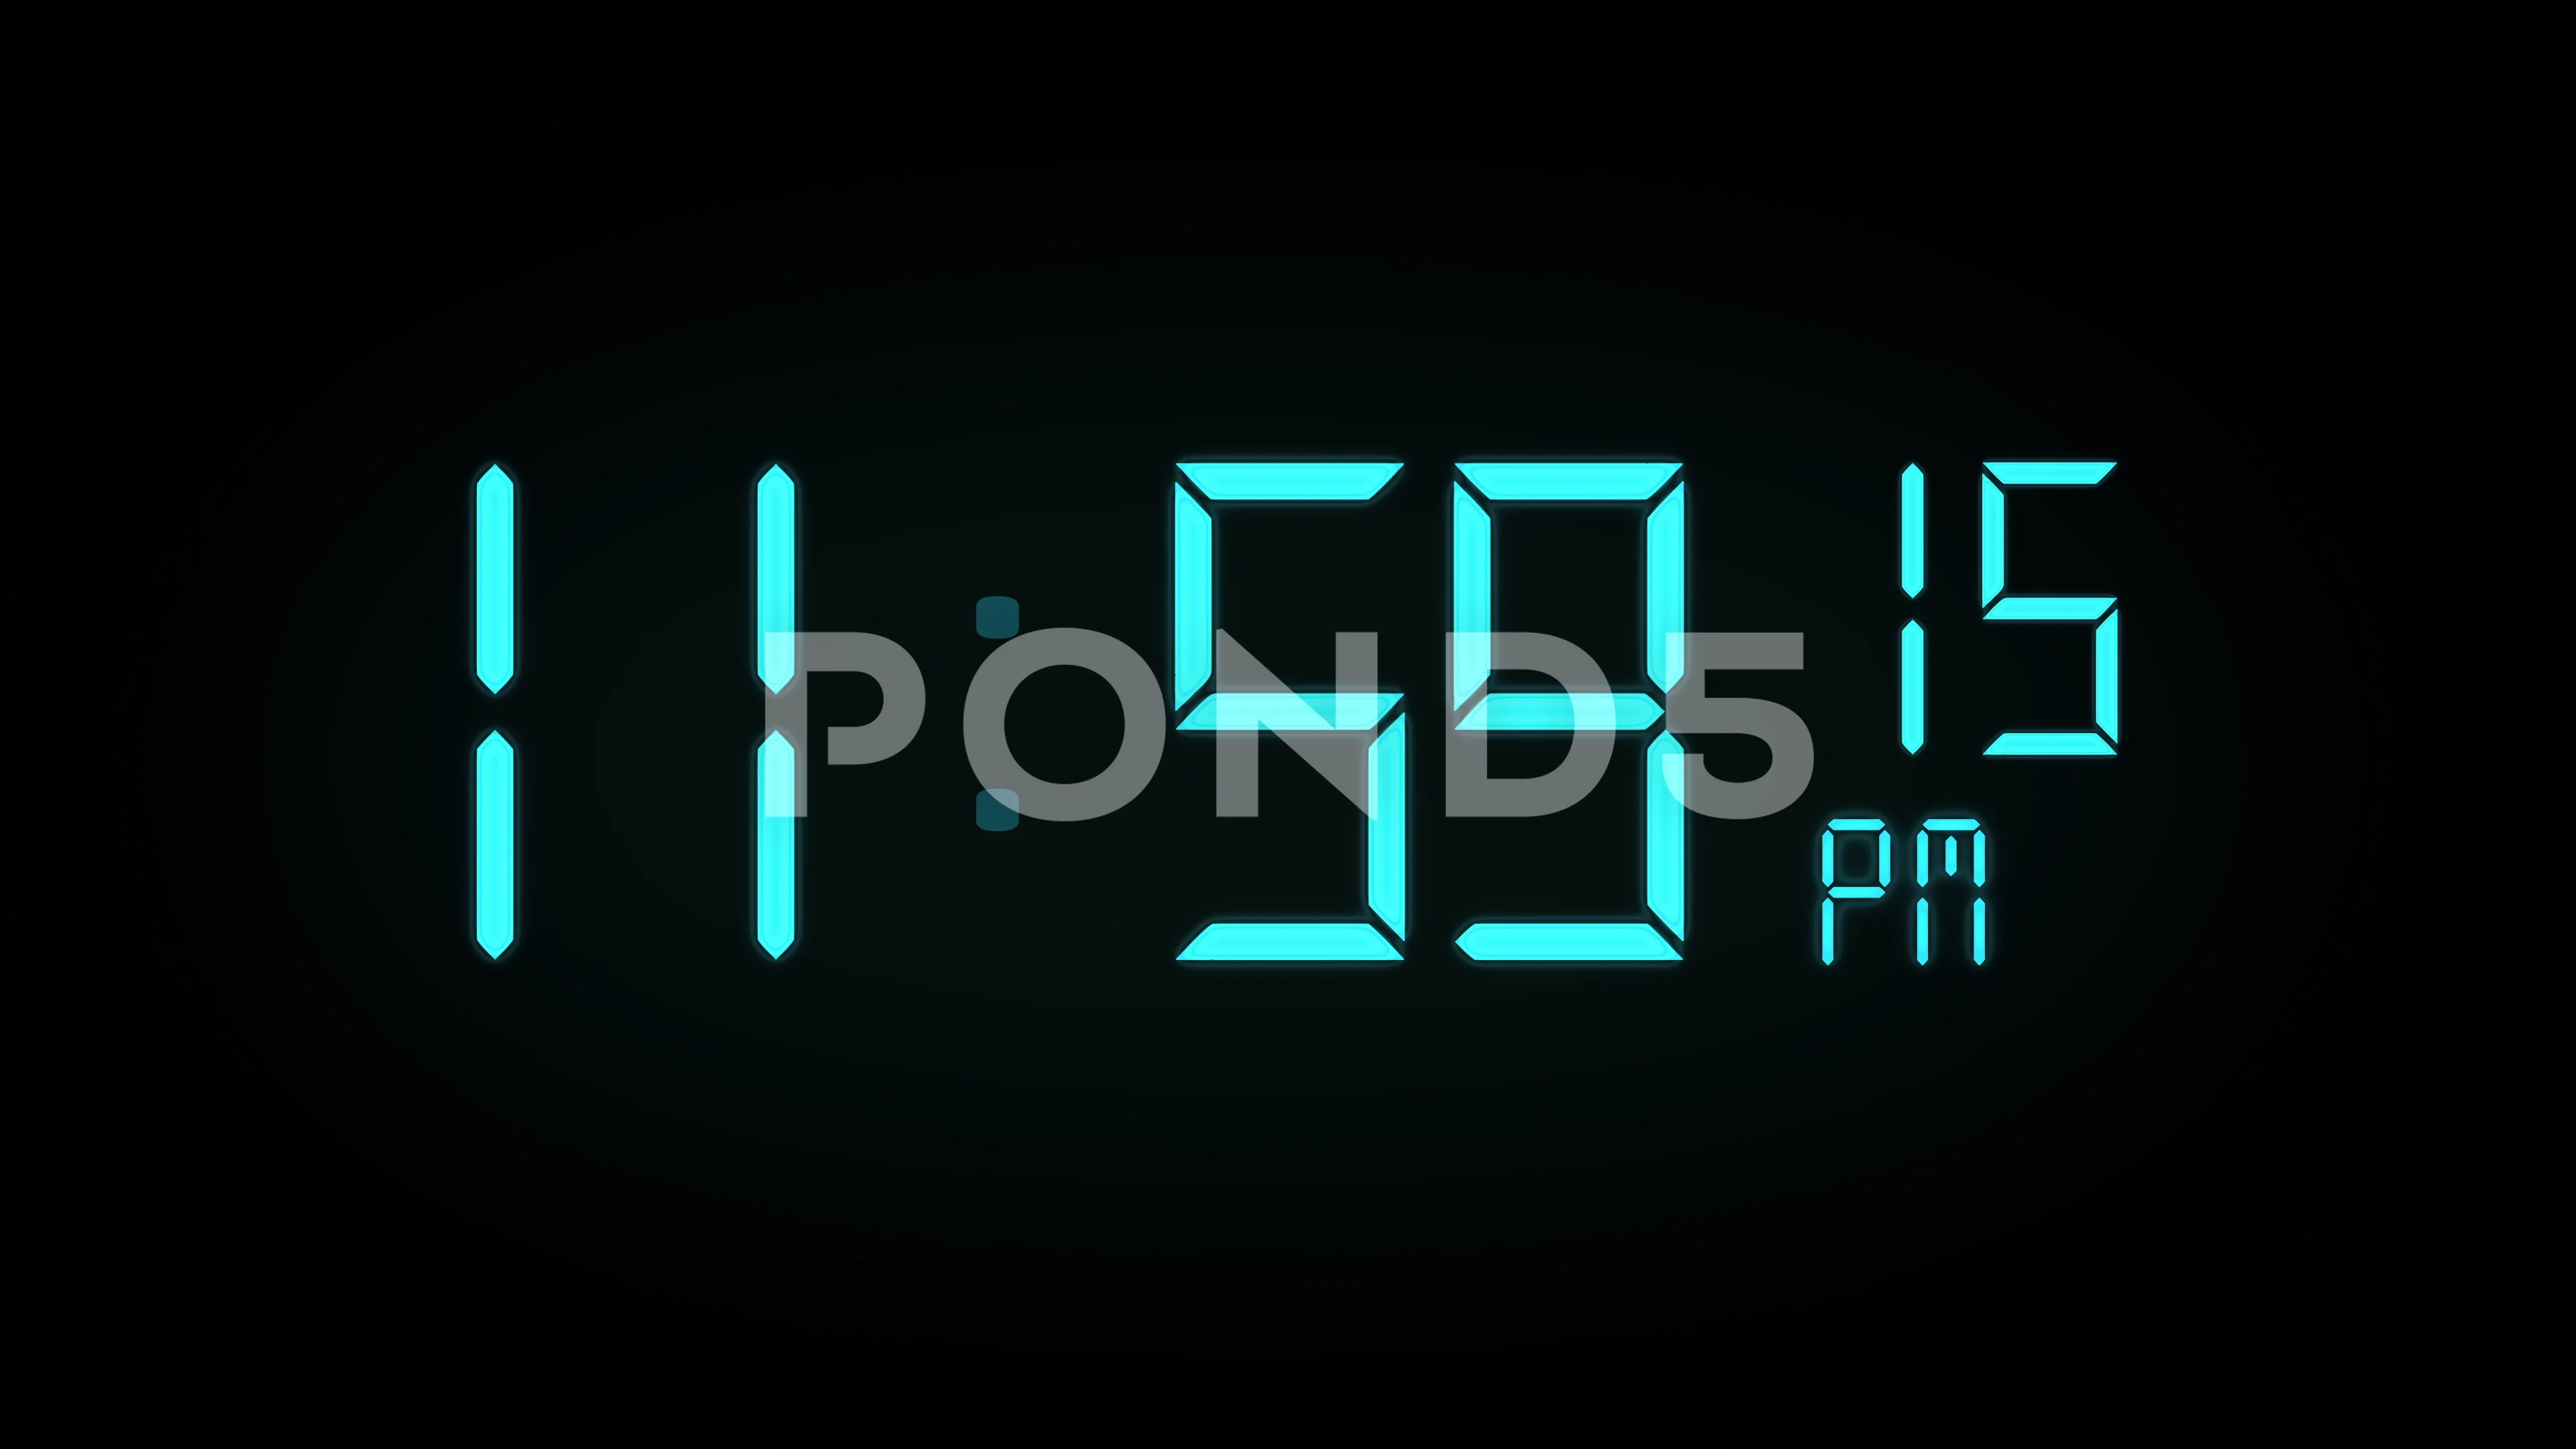 One minute digital clock countdown timer, Backgrounds Motion